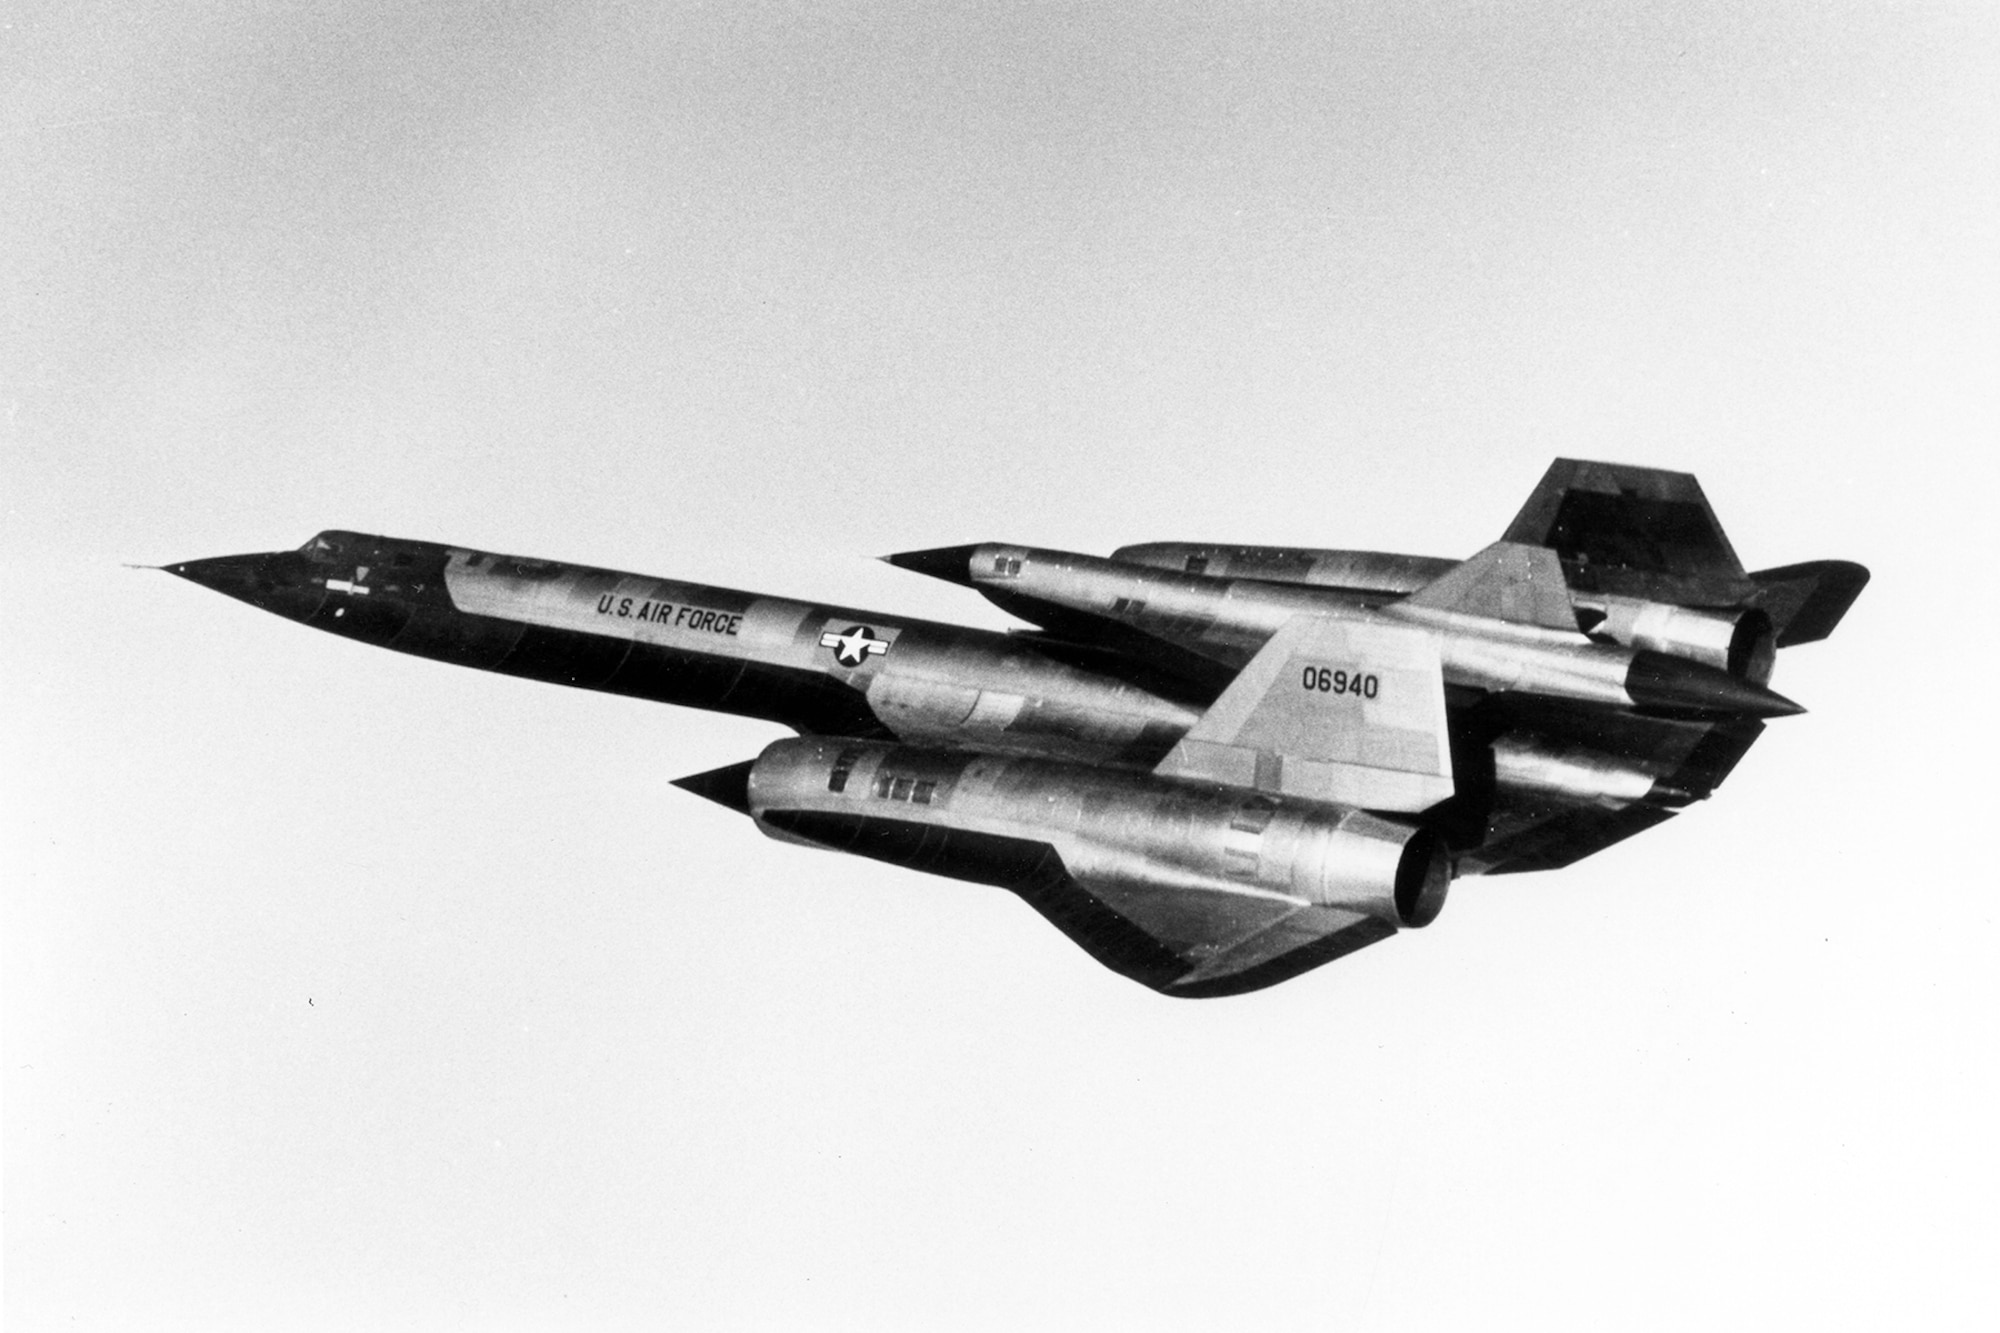 The D-21 was originally designed to be launched at supersonic speed from the back of an M-21 carrier aircraft (the M-21 was a modification of the A-12 design). In July 1966, a D-21 collided with its M-21 after release, destroying both and resulting in the death of one of the M-21’s two crew members. No further "piggyback" launches were attempted. (U.S. Air Force photo)